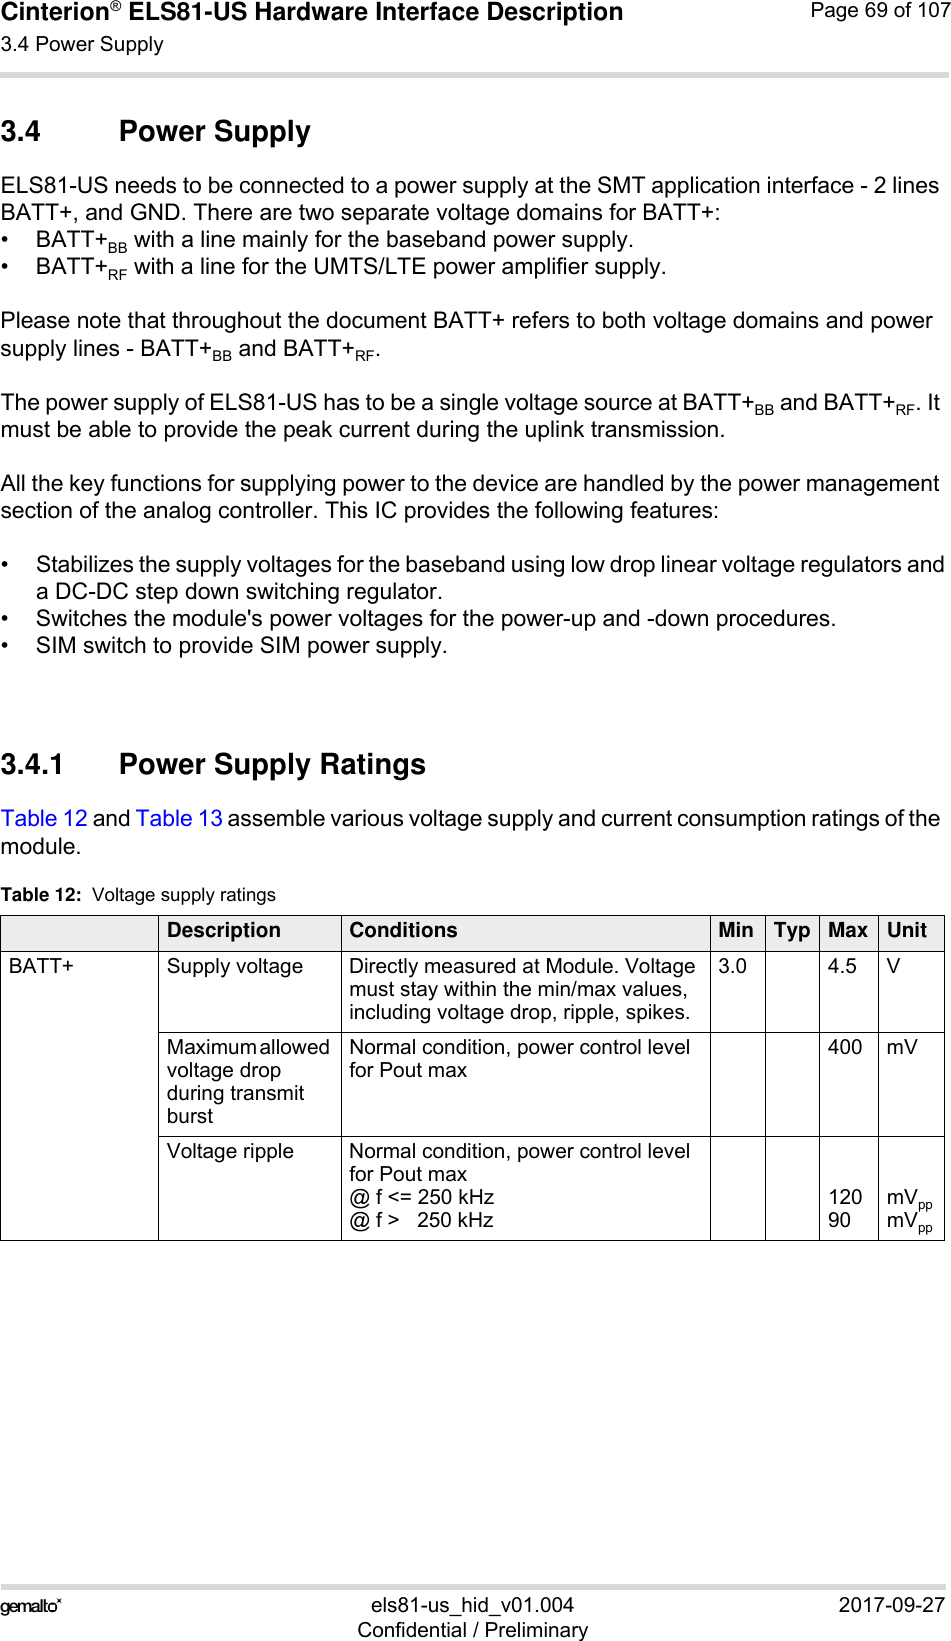 Cinterion® ELS81-US Hardware Interface Description3.4 Power Supply77els81-us_hid_v01.004 2017-09-27Confidential / PreliminaryPage 69 of 1073.4 Power SupplyELS81-US needs to be connected to a power supply at the SMT application interface - 2 lines BATT+, and GND. There are two separate voltage domains for BATT+:•BATT+BB with a line mainly for the baseband power supply.•BATT+RF with a line for the UMTS/LTE power amplifier supply.Please note that throughout the document BATT+ refers to both voltage domains and power supply lines - BATT+BB and BATT+RF.The power supply of ELS81-US has to be a single voltage source at BATT+BB and BATT+RF. It must be able to provide the peak current during the uplink transmission. All the key functions for supplying power to the device are handled by the power management section of the analog controller. This IC provides the following features:• Stabilizes the supply voltages for the baseband using low drop linear voltage regulators anda DC-DC step down switching regulator.• Switches the module&apos;s power voltages for the power-up and -down procedures.• SIM switch to provide SIM power supply.3.4.1 Power Supply RatingsTable 12 and Table 13 assemble various voltage supply and current consumption ratings of the module. Table 12:  Voltage supply ratings Description Conditions Min Typ Max UnitBATT+ Supply voltage  Directly measured at Module. Voltage must stay within the min/max values, including voltage drop, ripple, spikes. 3.0 4.5 VMaximum allowed voltage drop during transmit burst Normal condition, power control level for Pout max400 mVVoltage ripple  Normal condition, power control level for Pout max@ f &lt;= 250 kHz@ f &gt;   250 kHz12090mVppmVpp